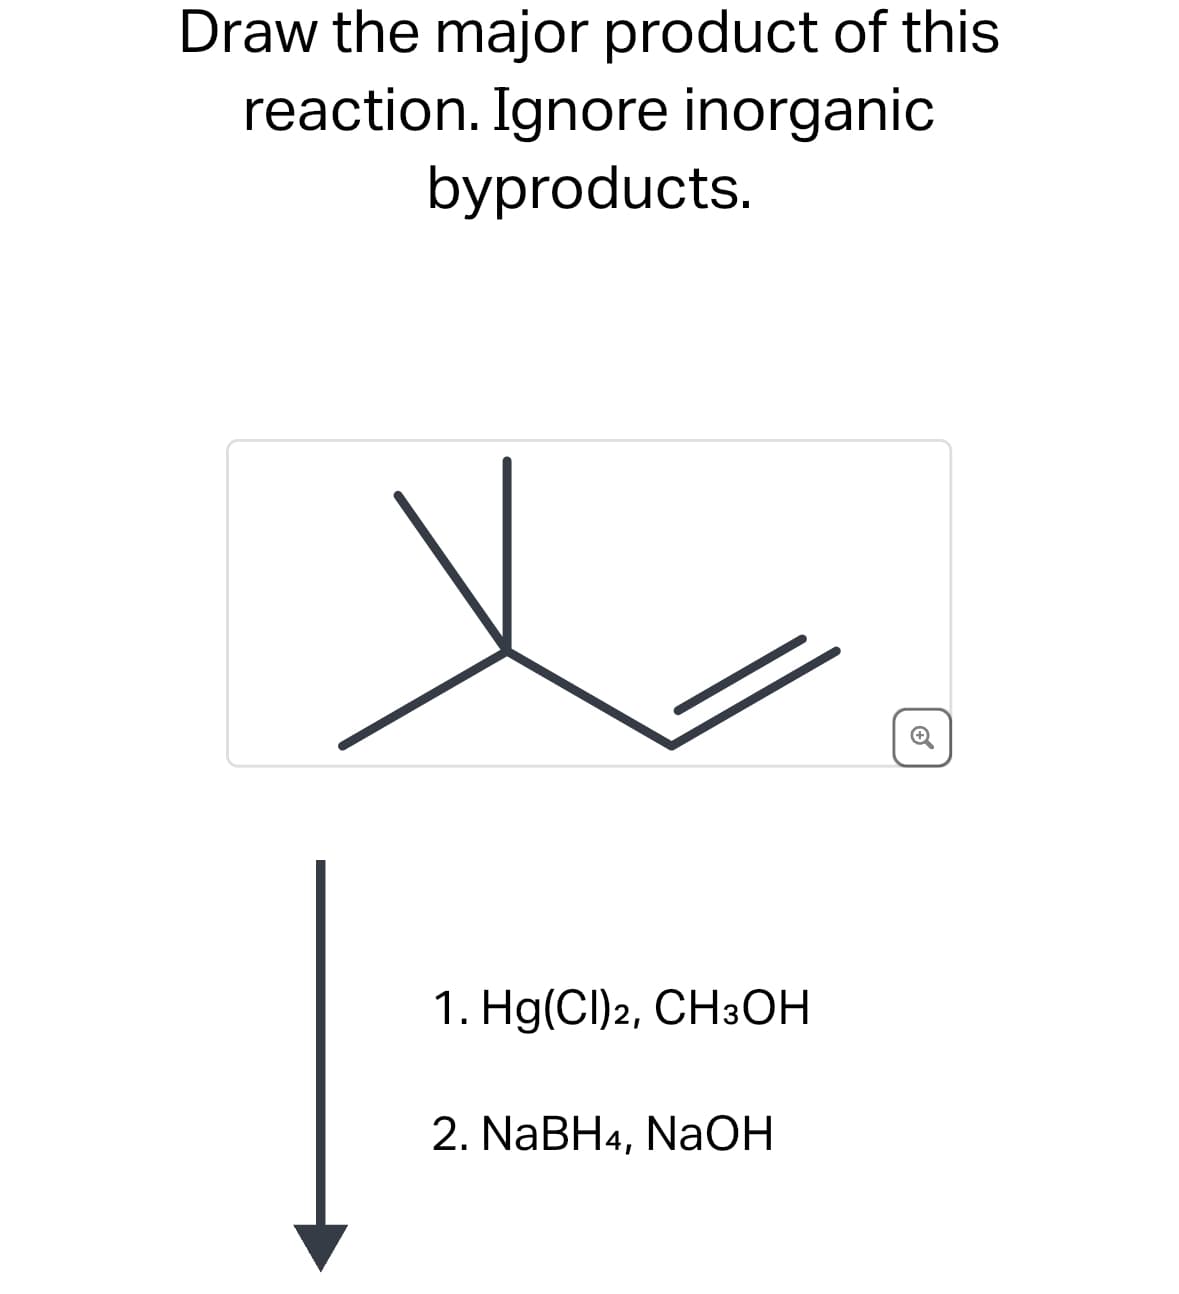 Draw the major product of this
reaction. Ignore inorganic
byproducts.
C
1. Hg(Cl)2, CH3OH
2. NaBH4, NaOH